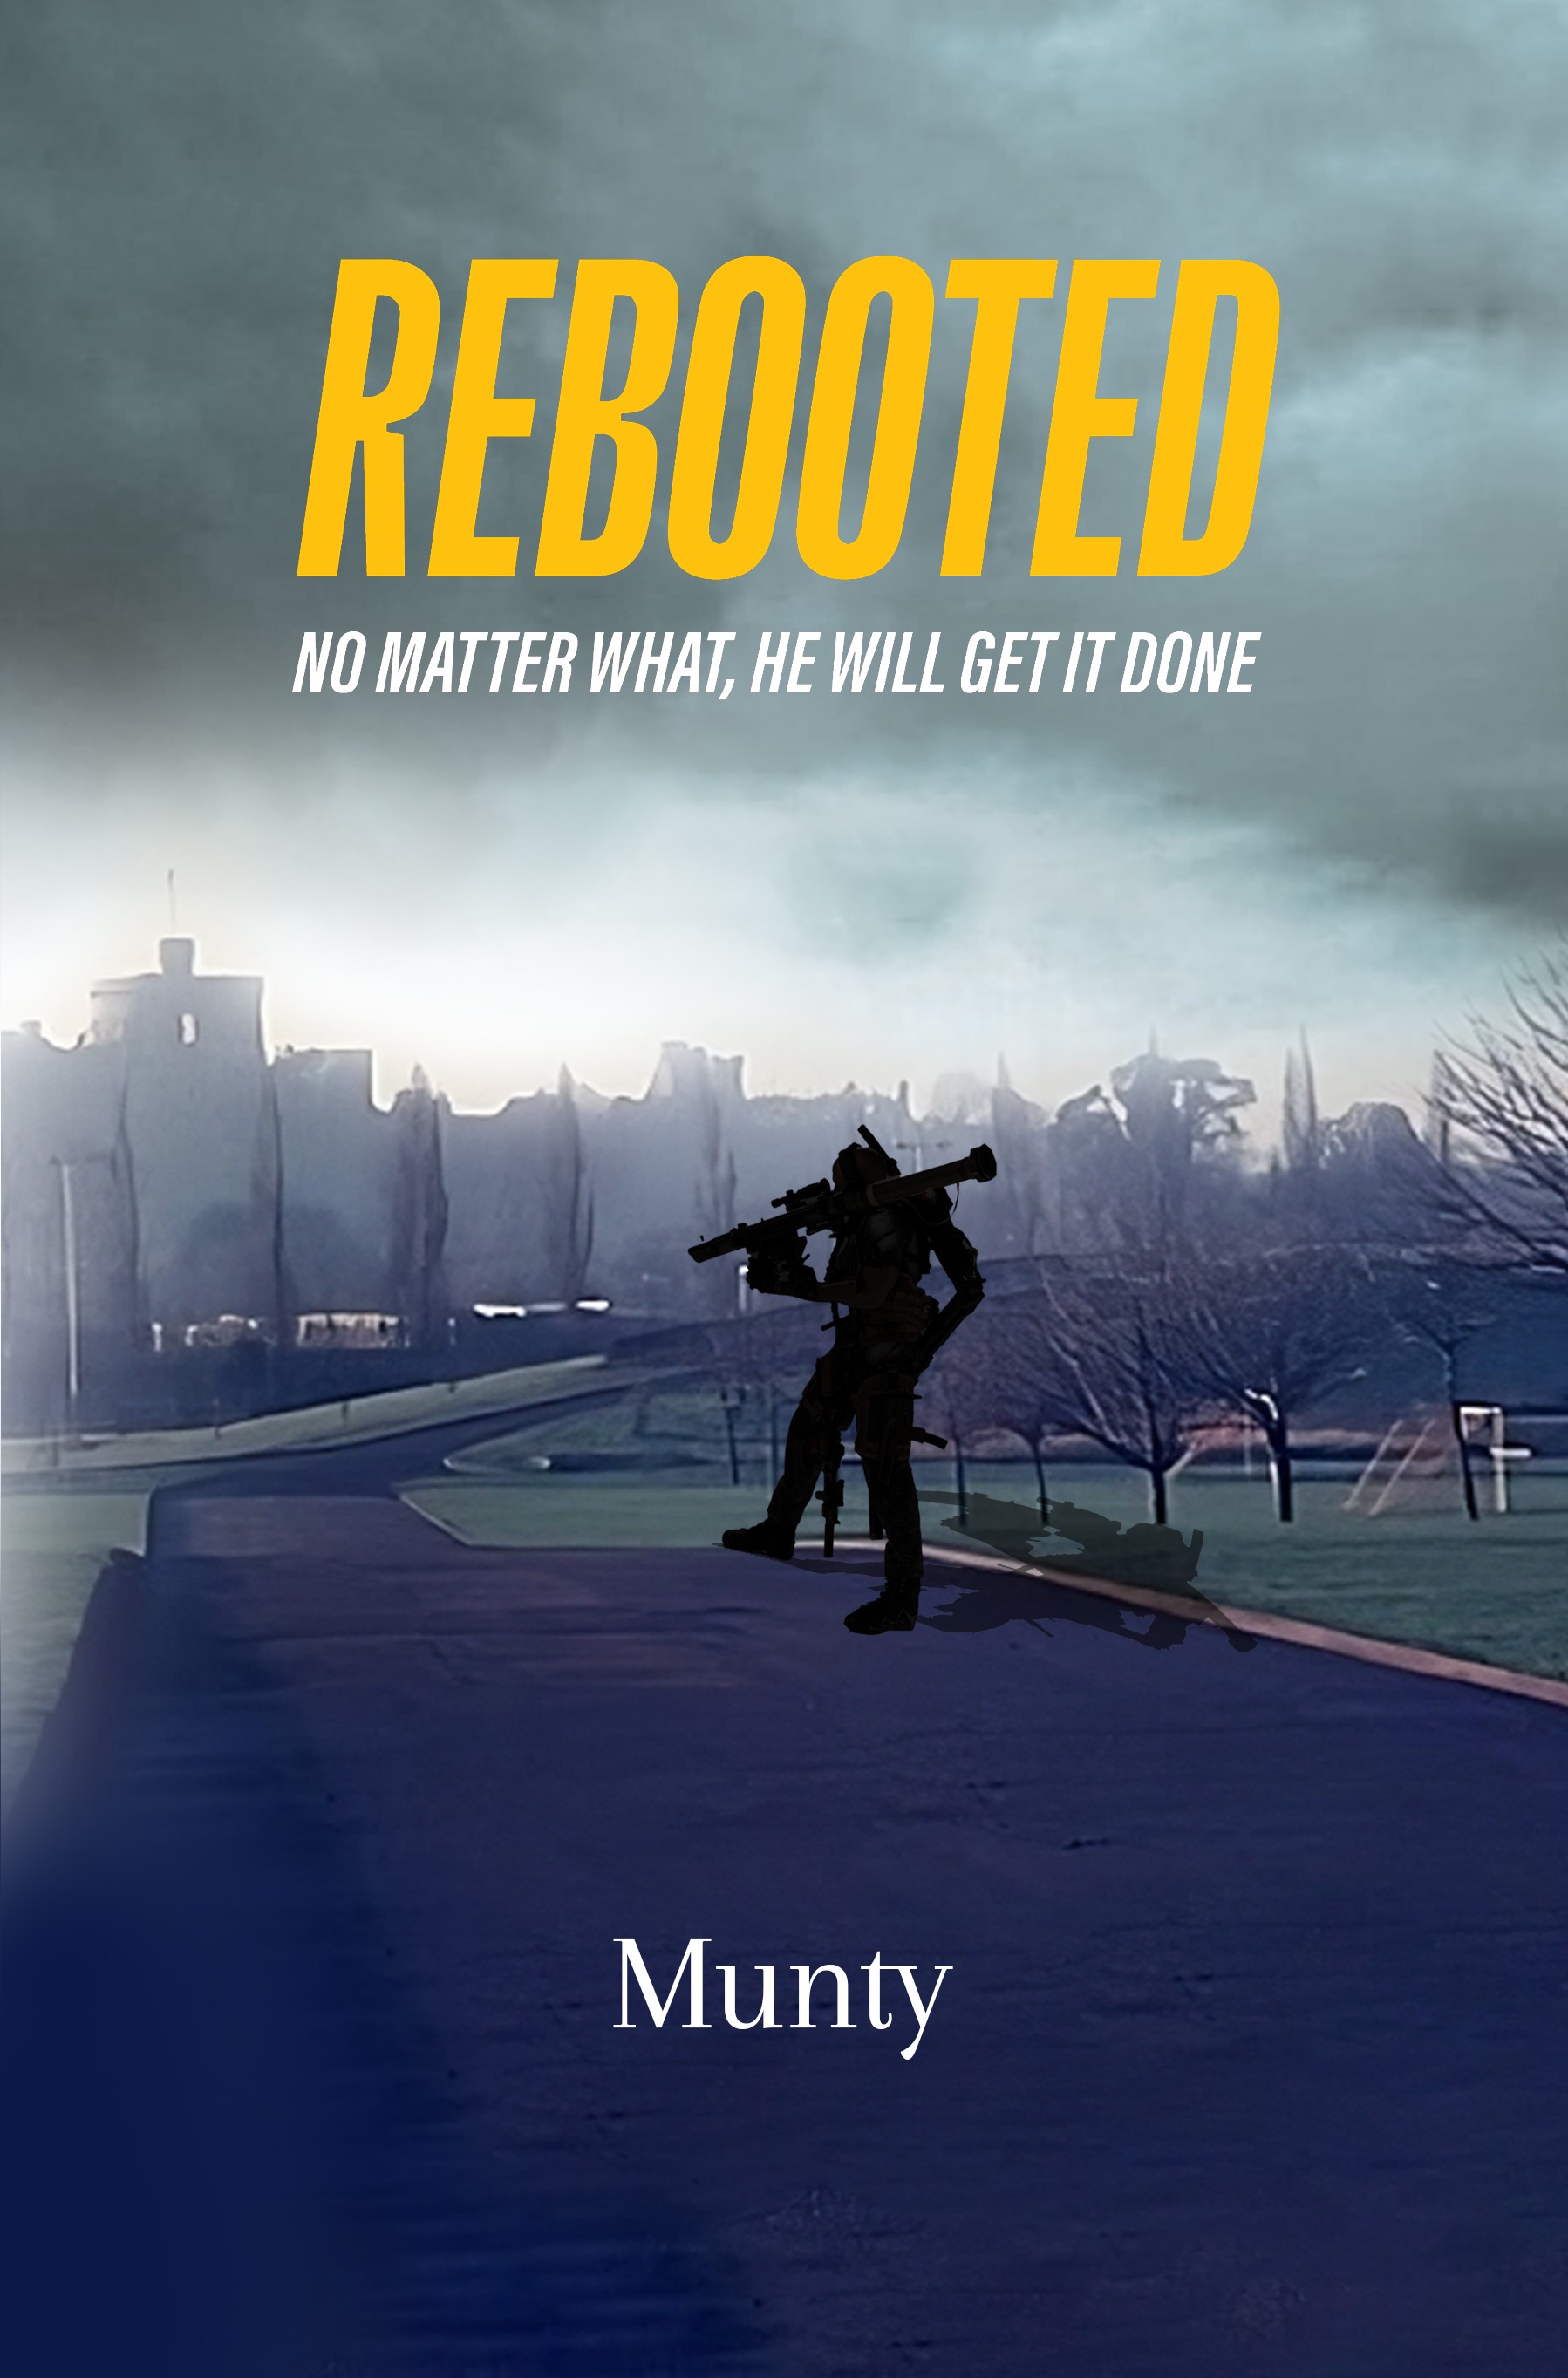 "Rebooted" by Munty: A Heart-Pounding Thriller that Captivates Readers Worldwide